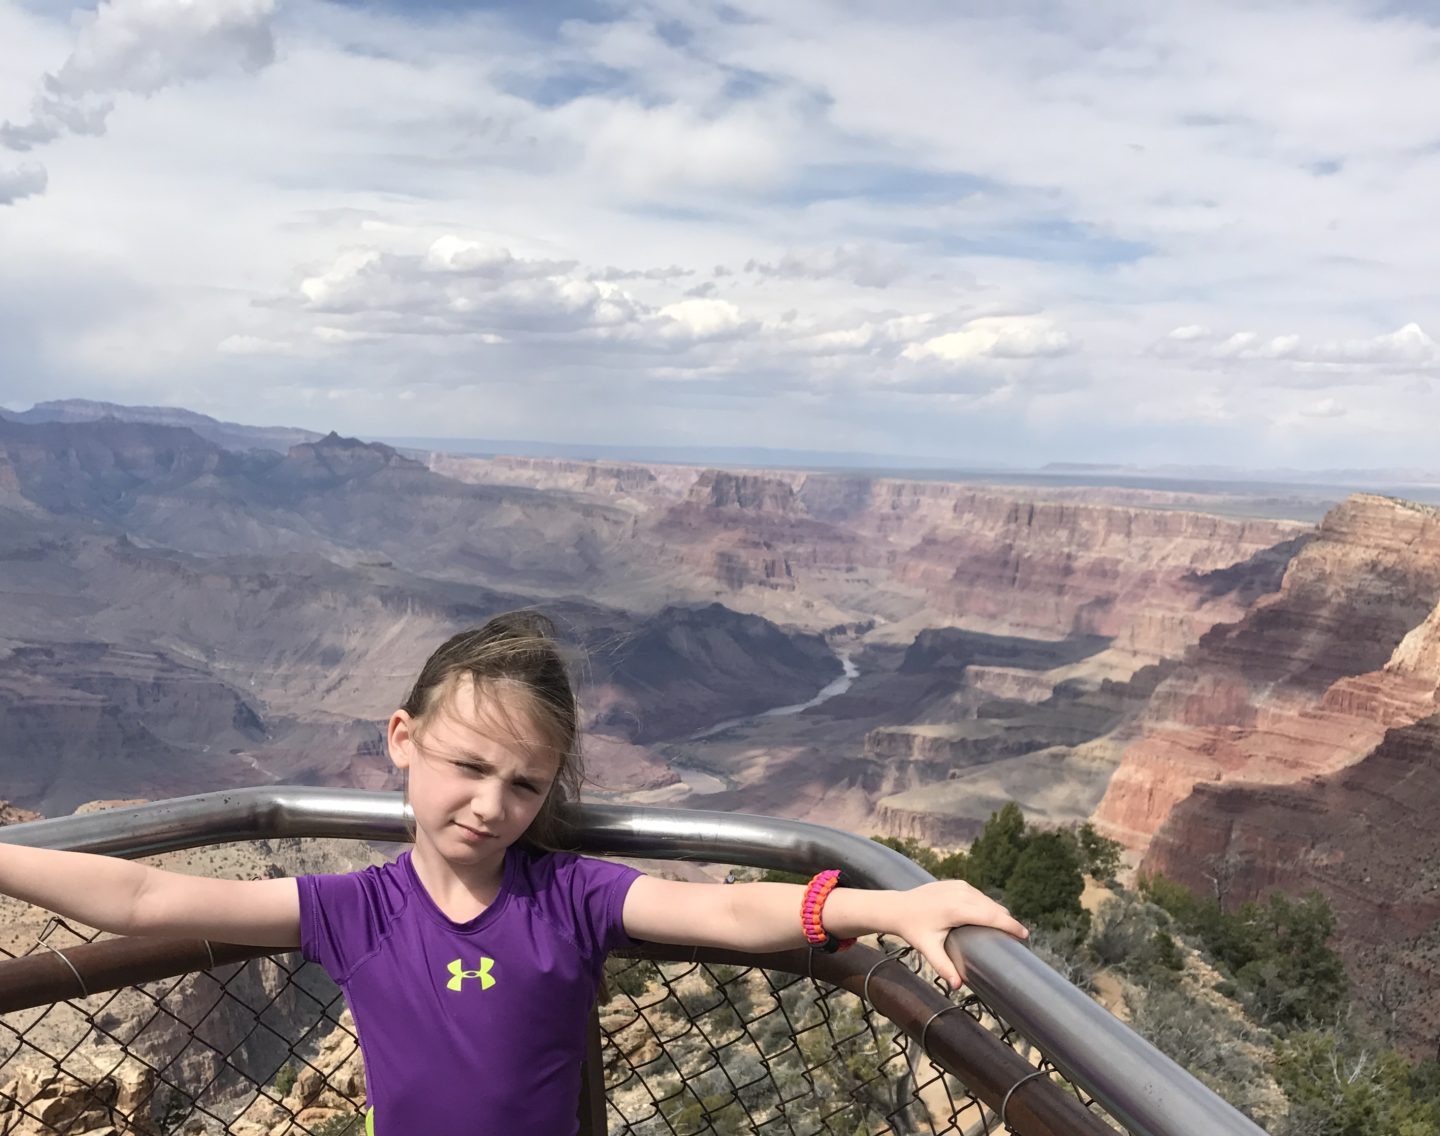 Going to the Grand Canyon: Tips from Ladybug